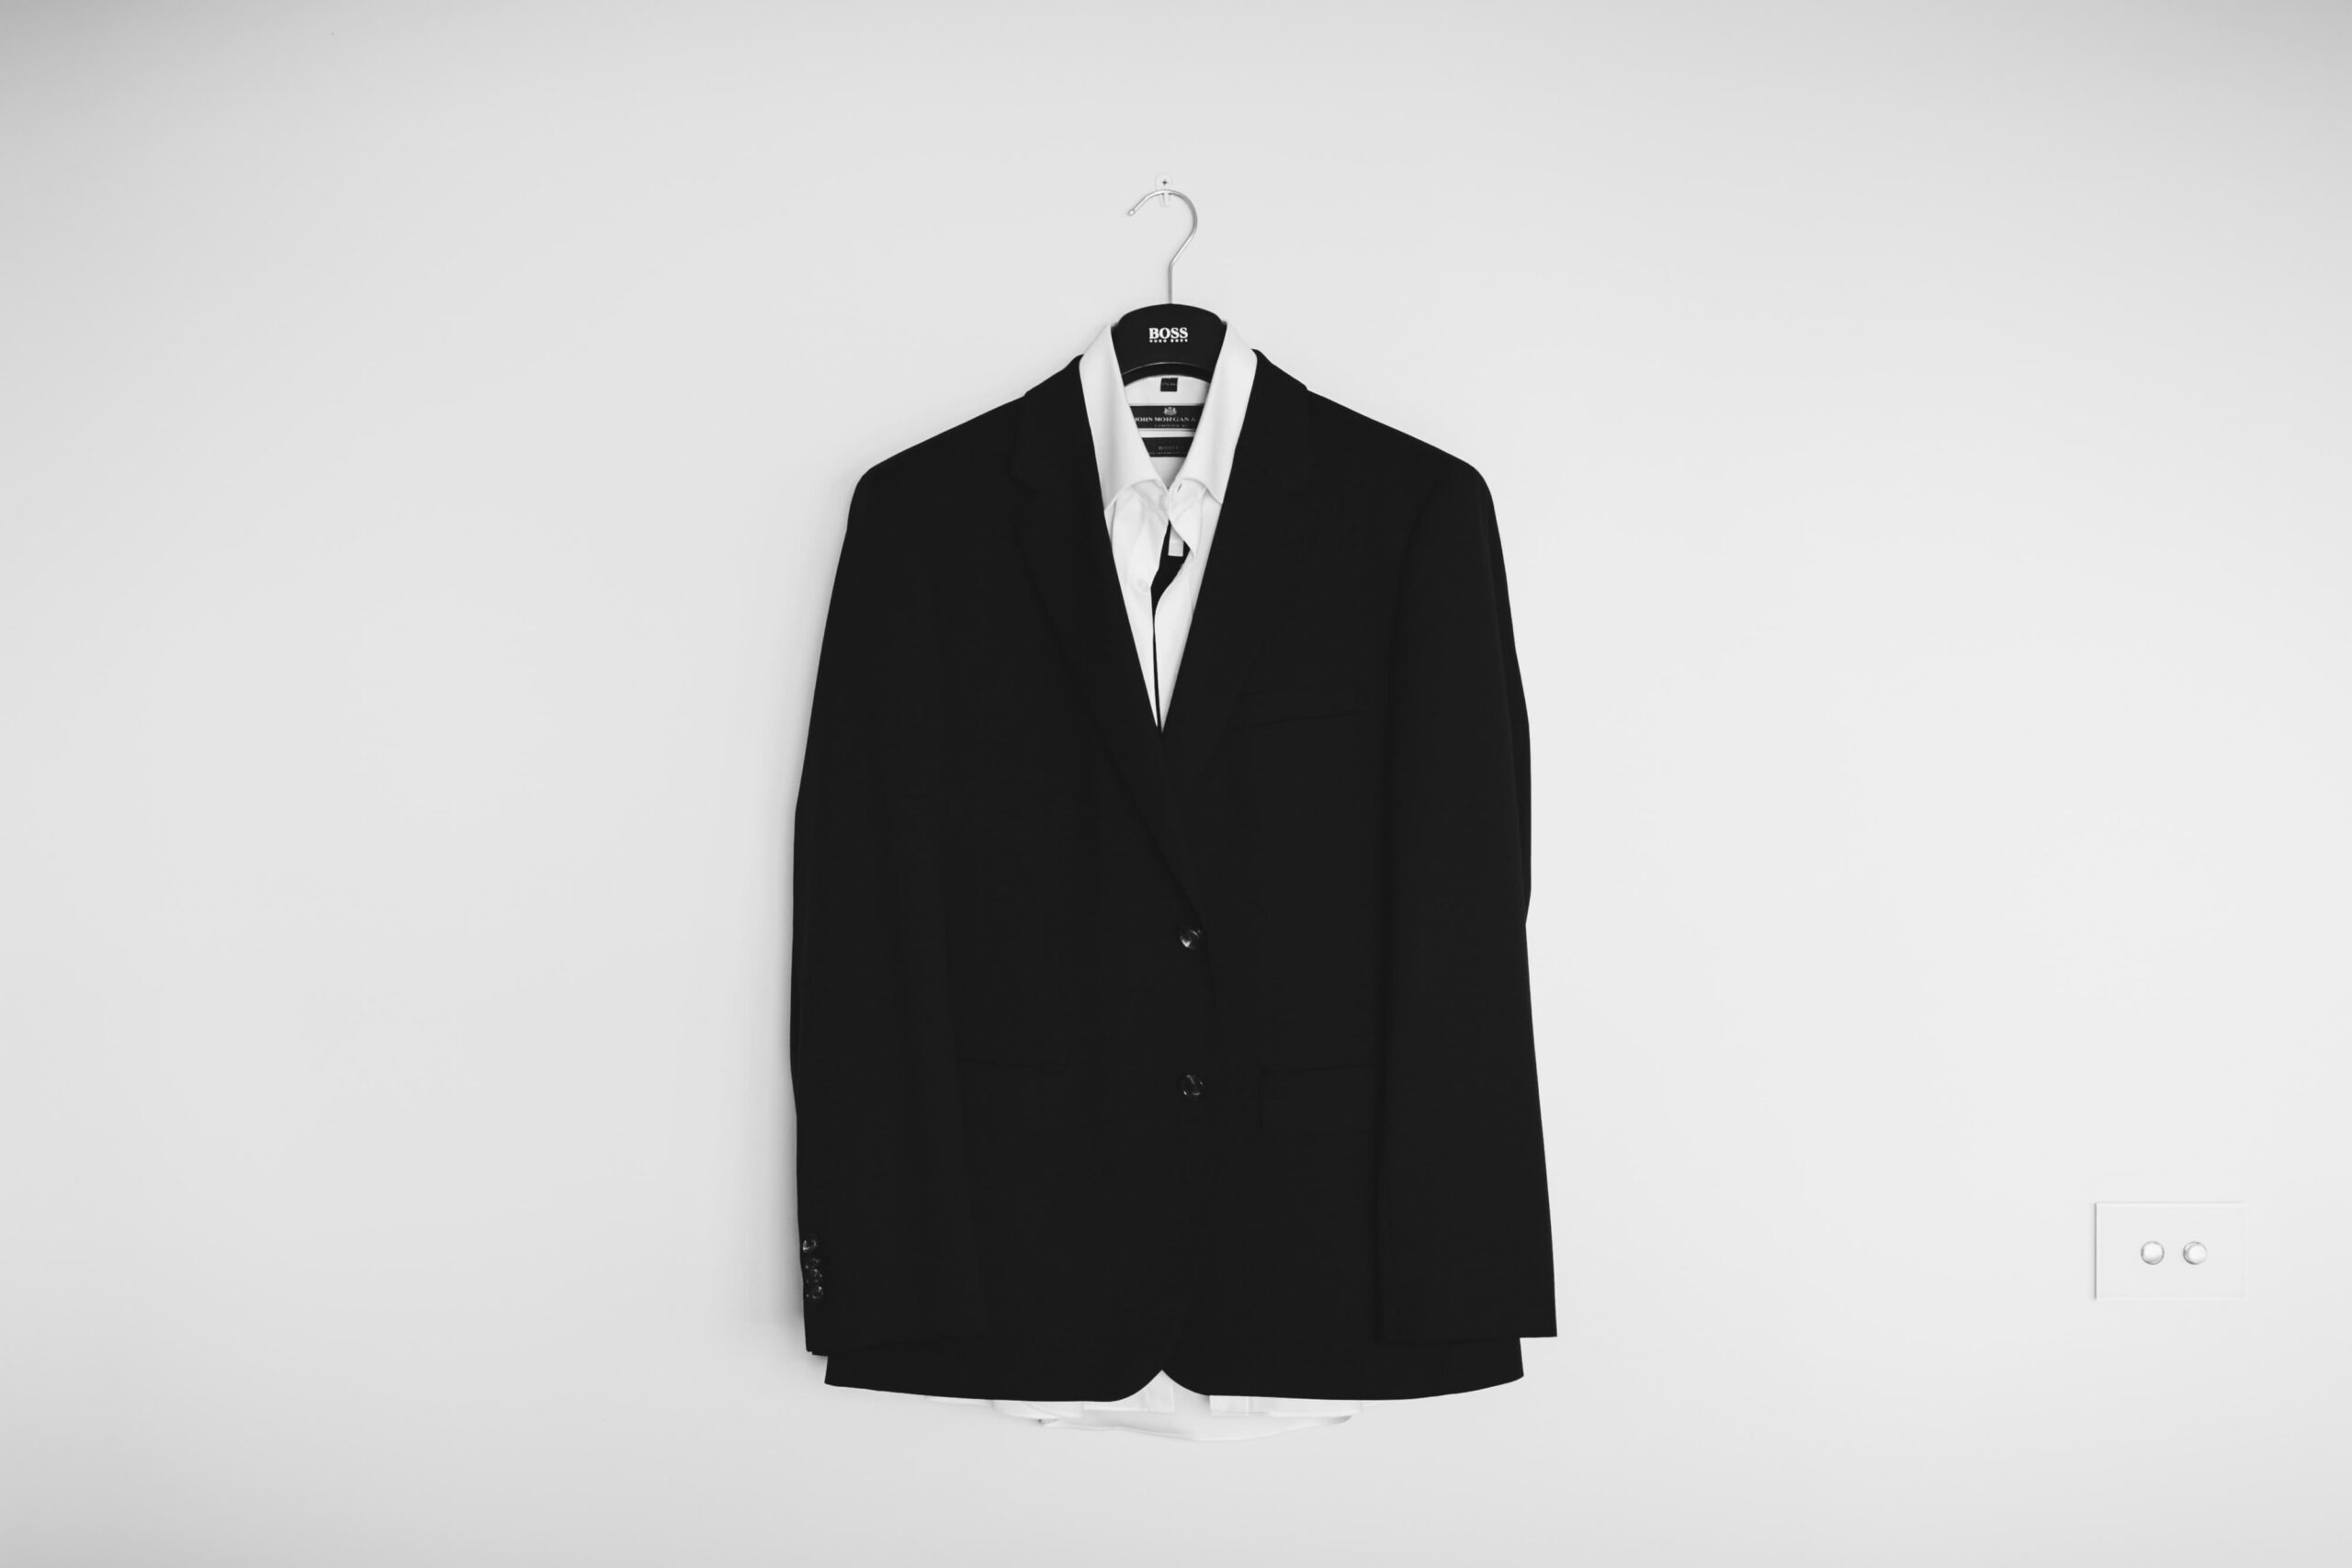 Black Suit Hanging On Wall